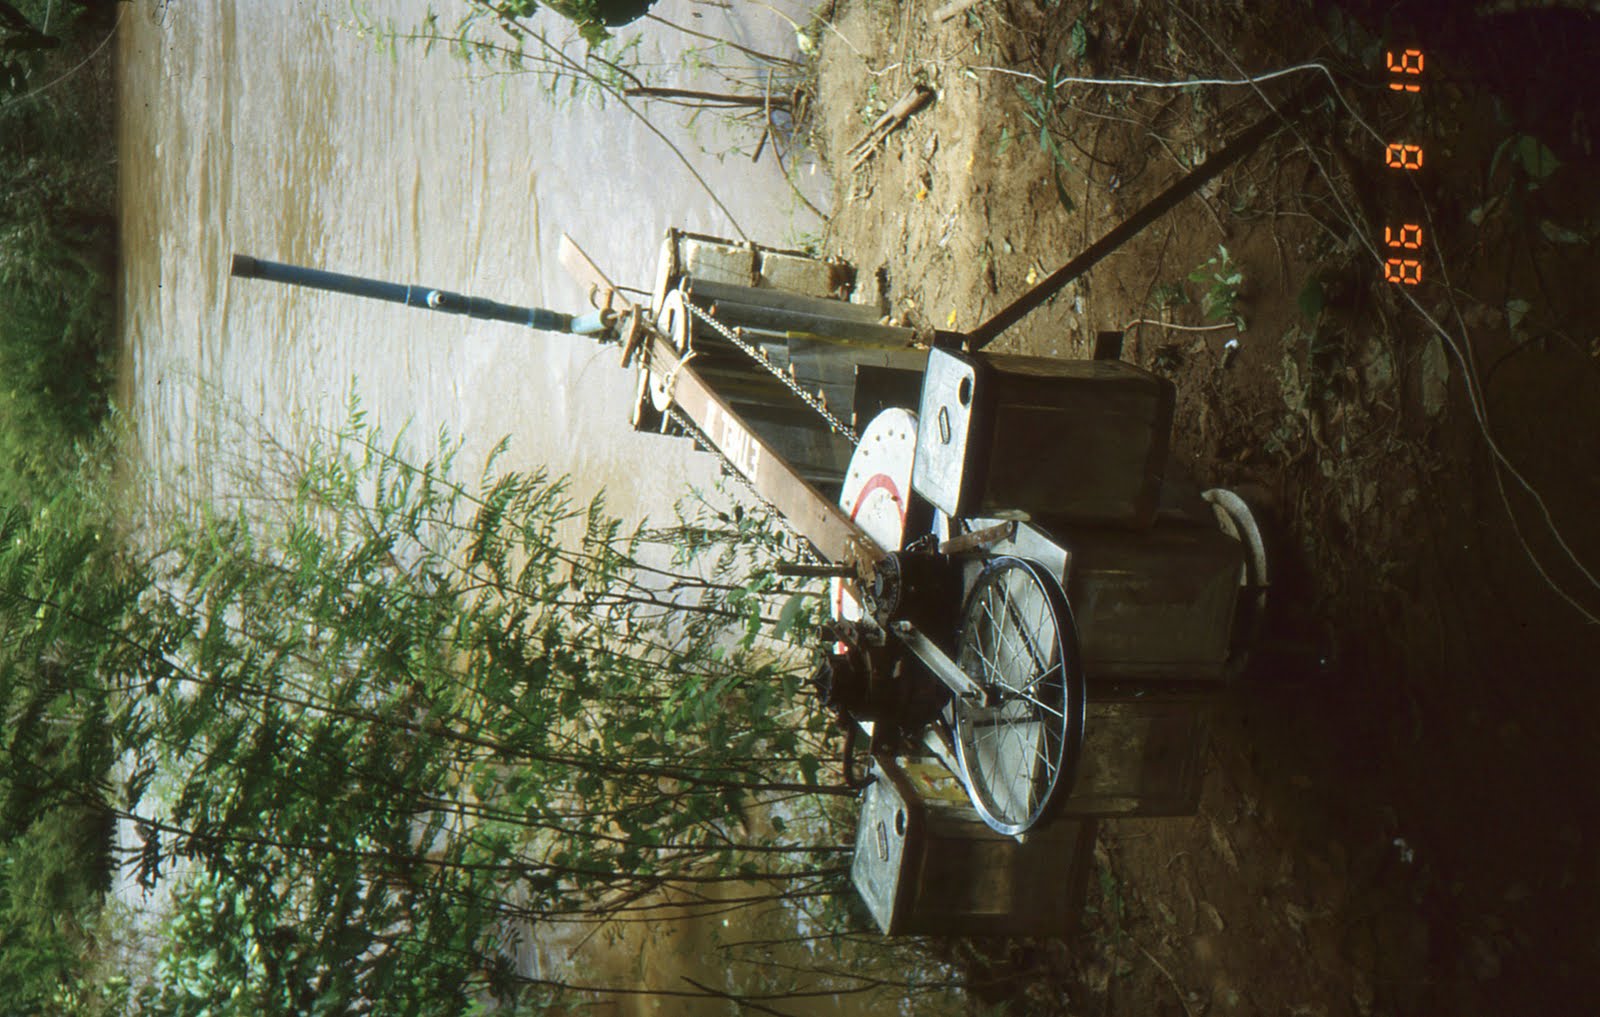 Linear turbine ready for trials in Pai river northern Thailand 1986